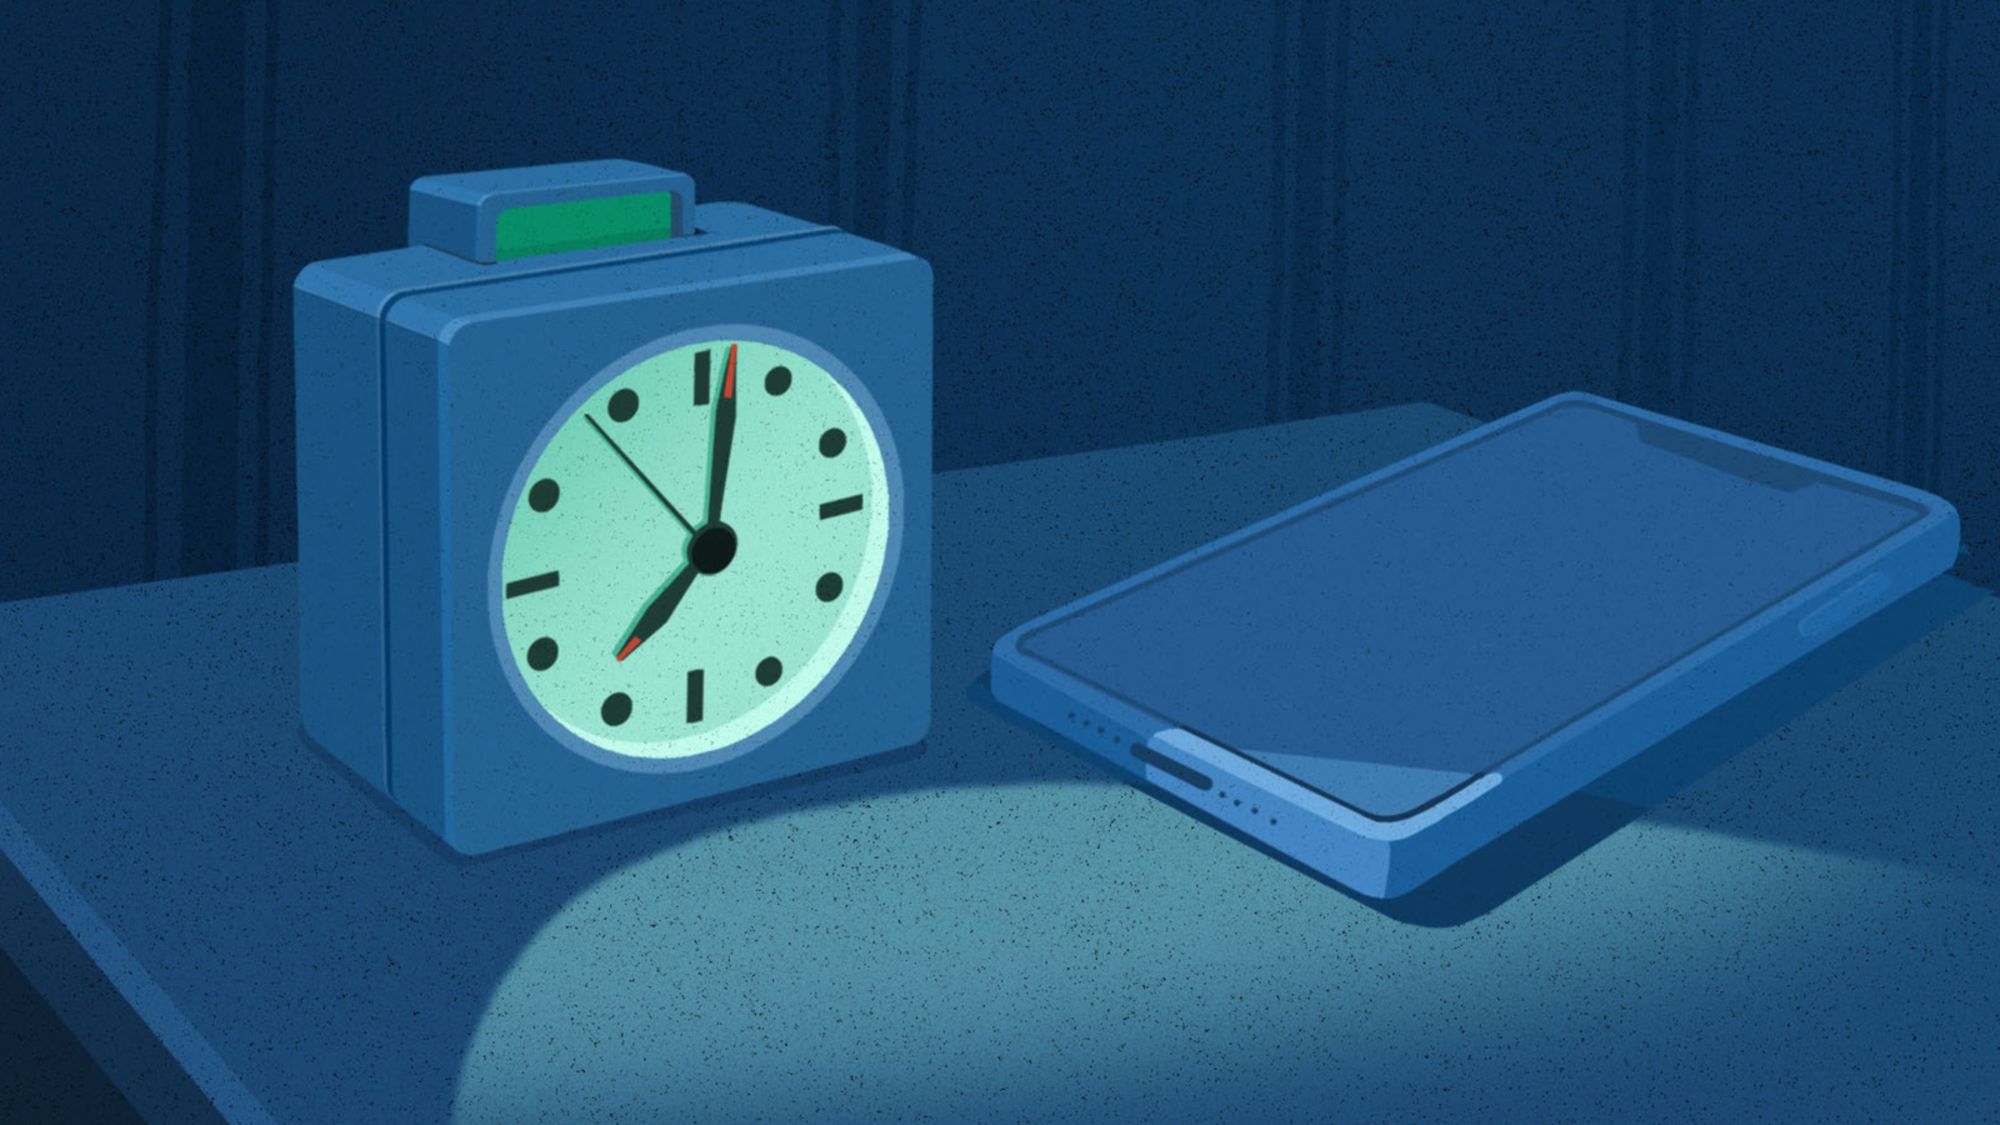 20220708 a case for the alarm clock illustration